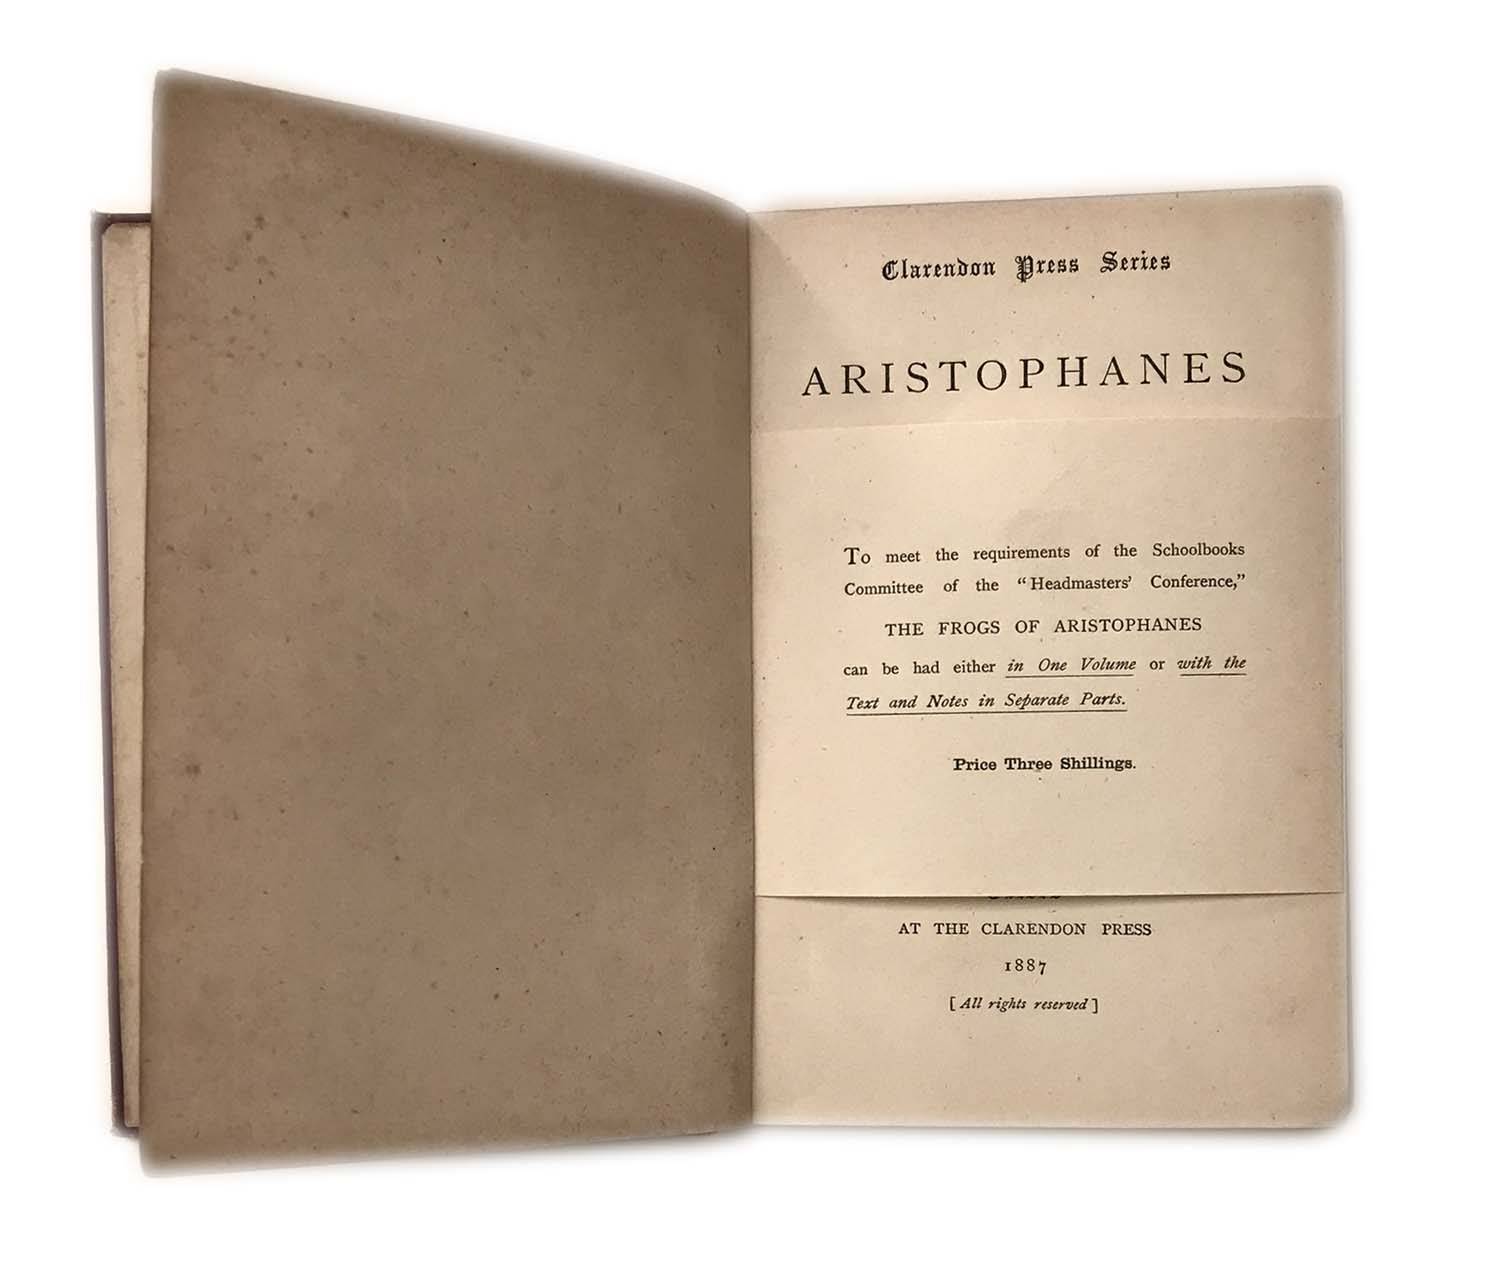 ARISTOPHANES THE FROGS